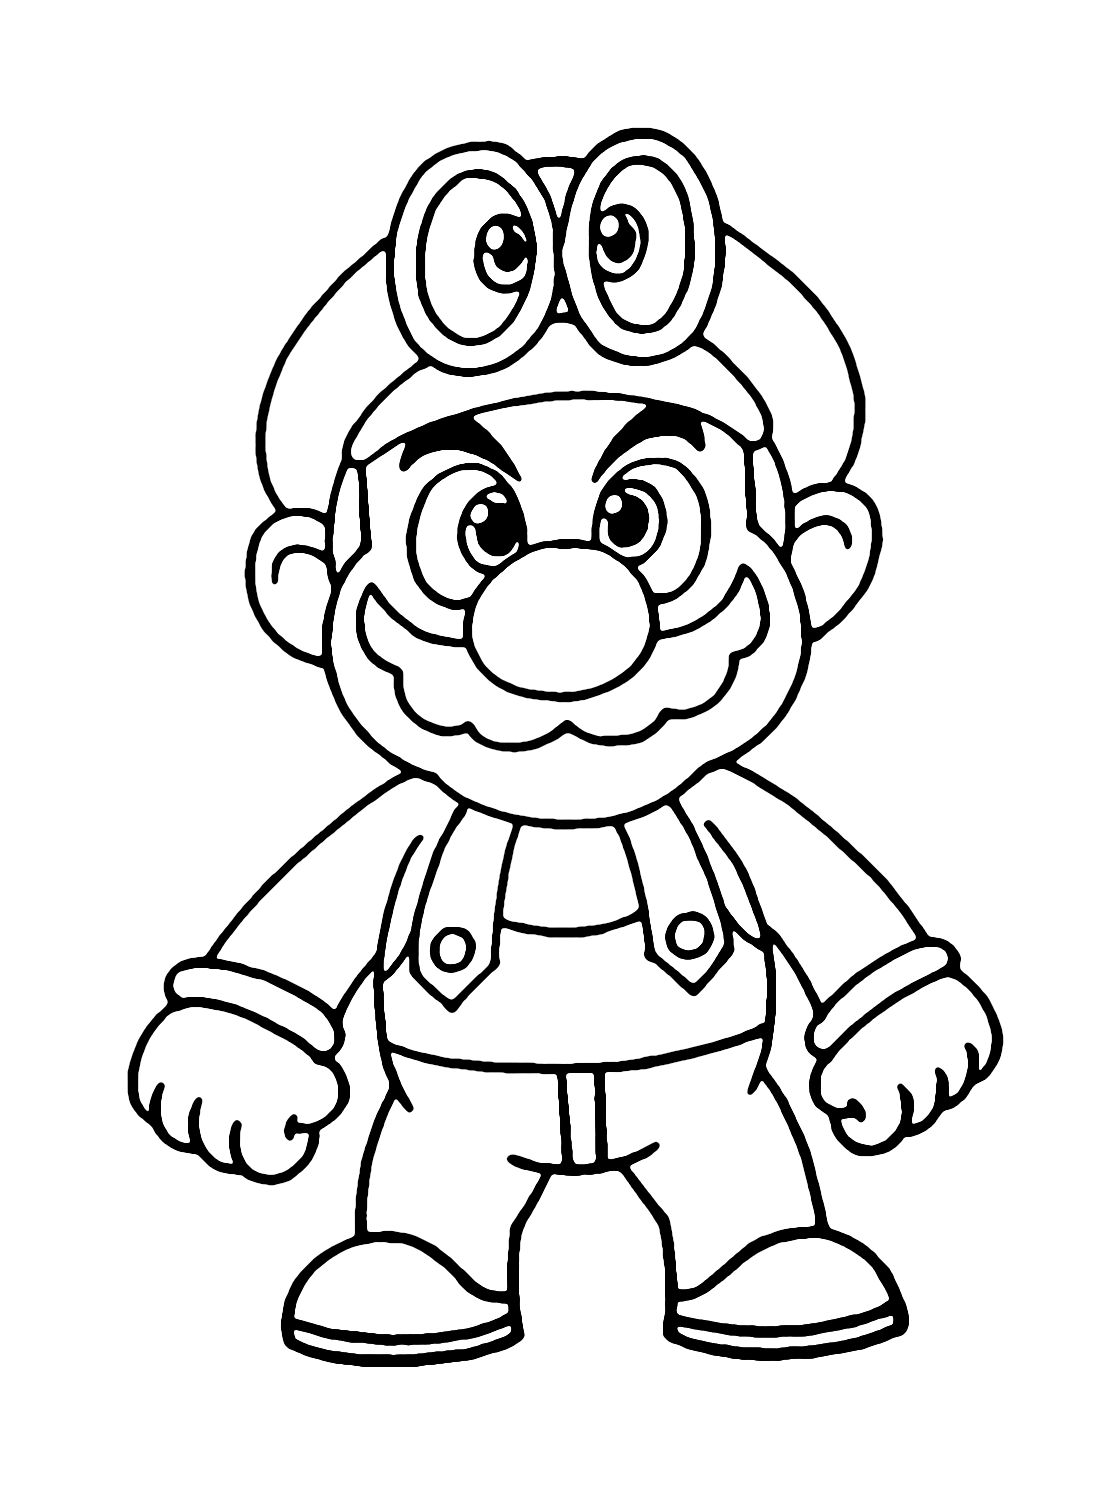 Draw Mario from Super Mario Odyssey Coloring Page